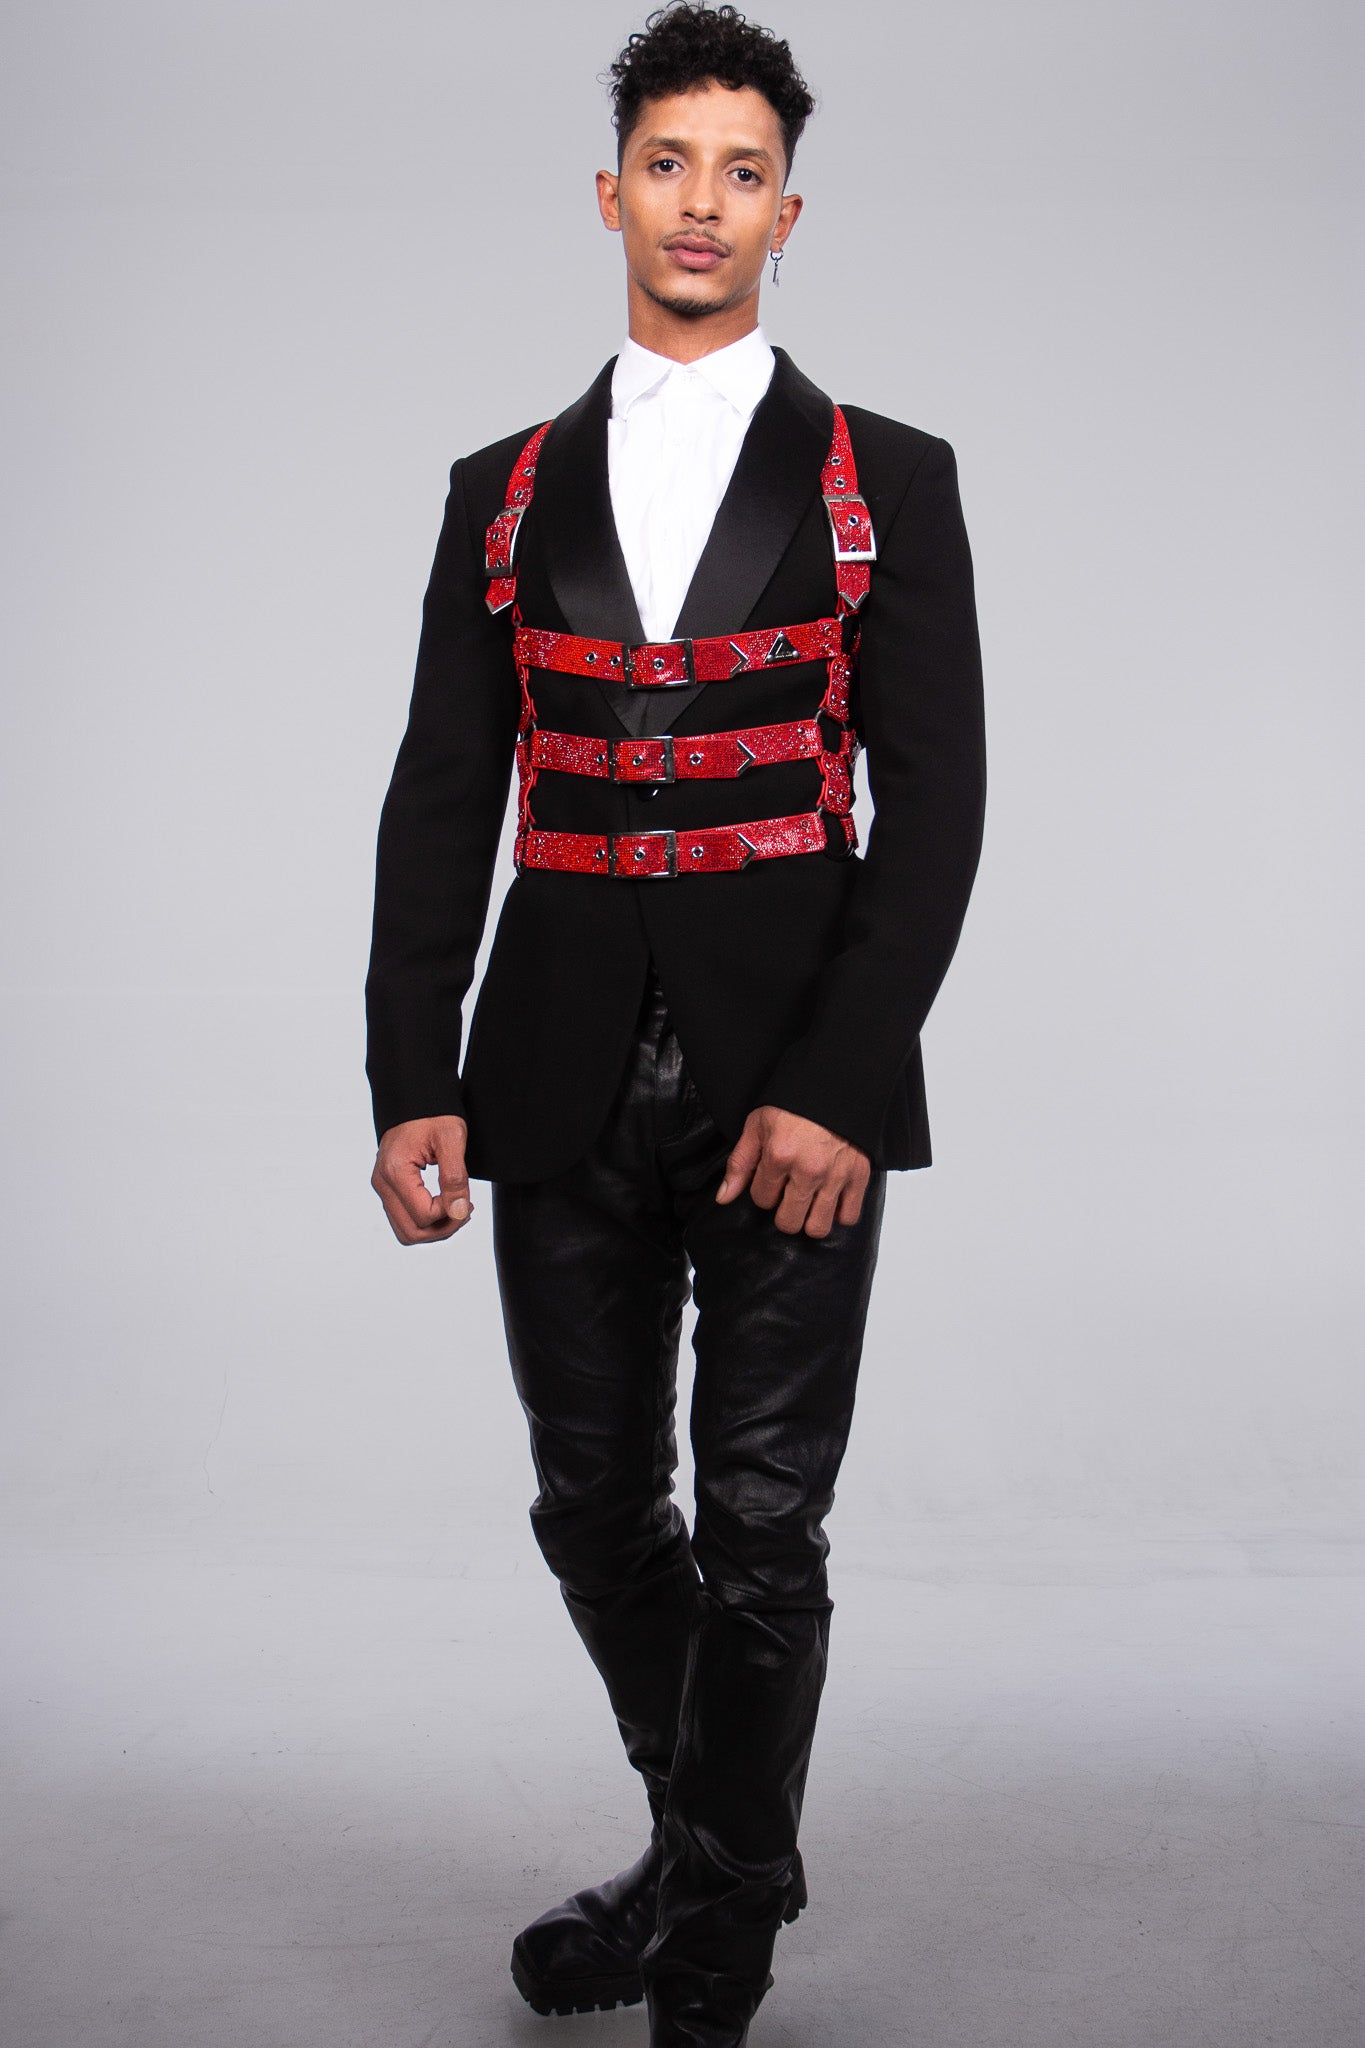 The picture shows a handsome male model posing for the accessory fashion brand Lorand Lajos. the shiny red crystals look very elegant against the black high quality fabric of the tuxedo.